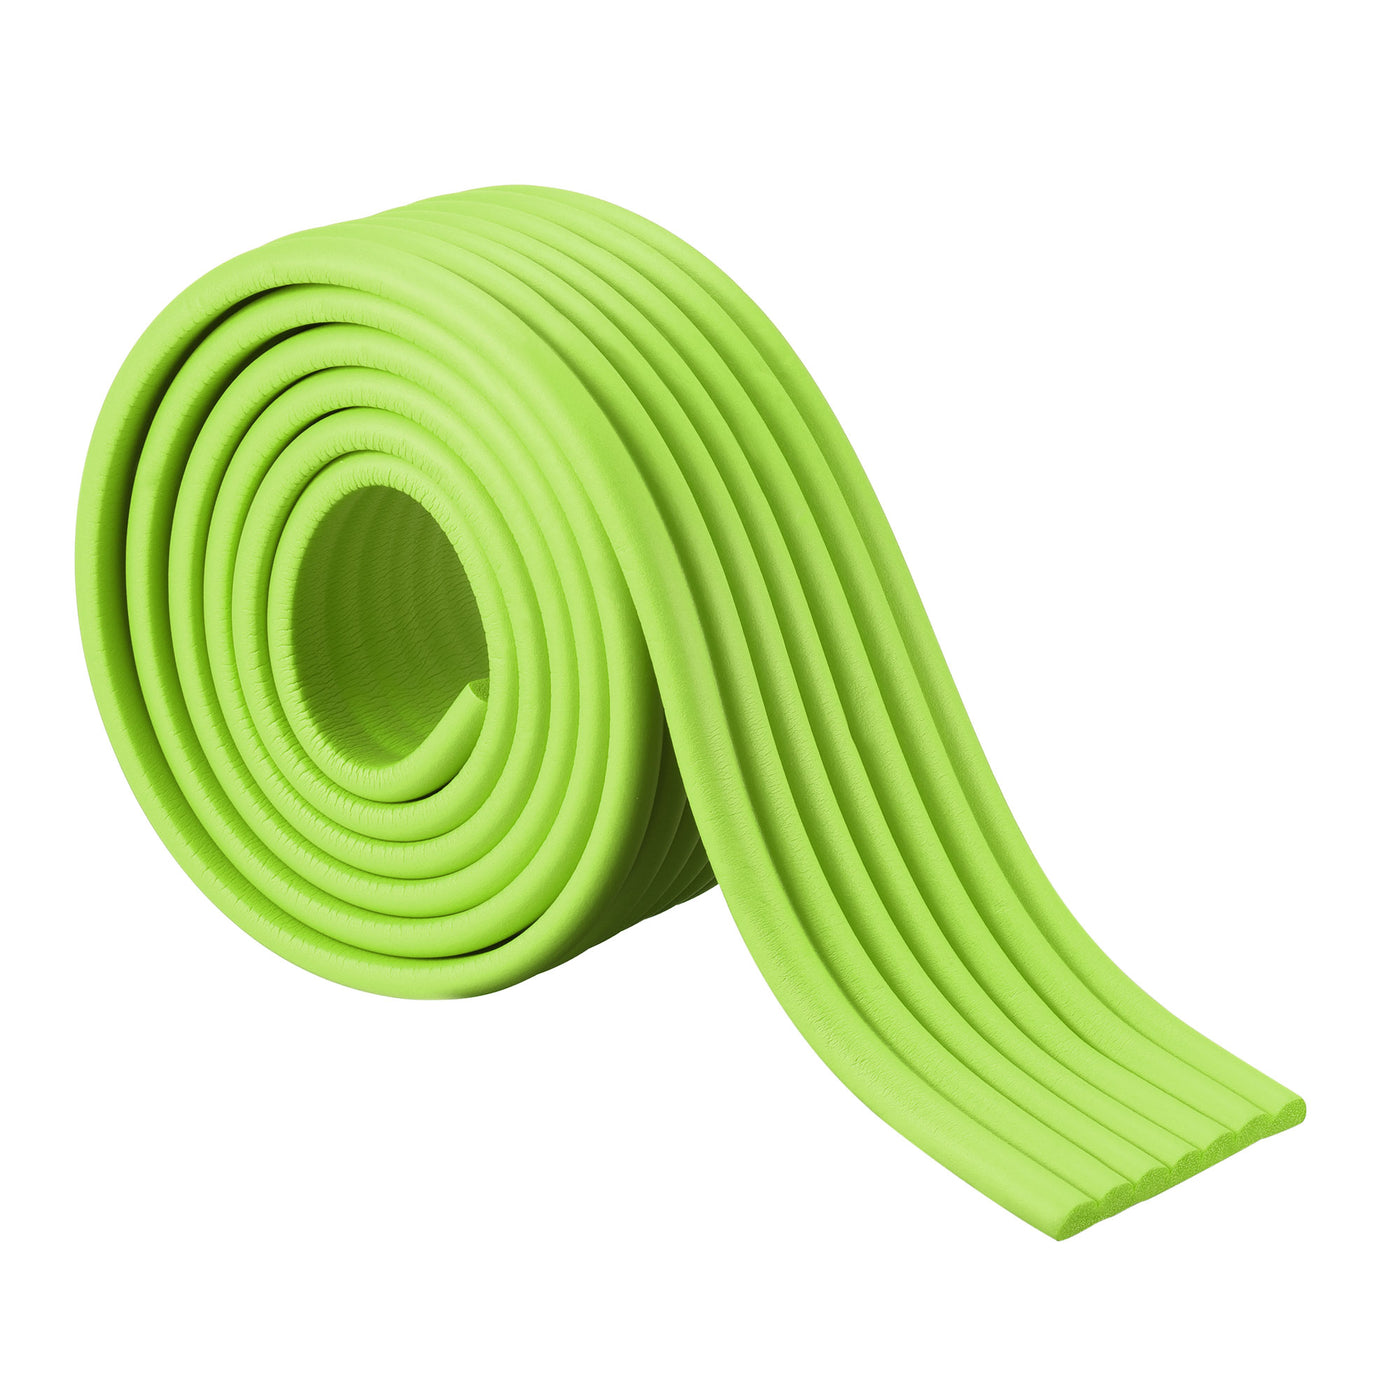 uxcell Uxcell Furniture Table Edge Protectors W-Shape Soft NBR Anti-collision Strip with Tape, 2 Meters Length Green, 2pcs